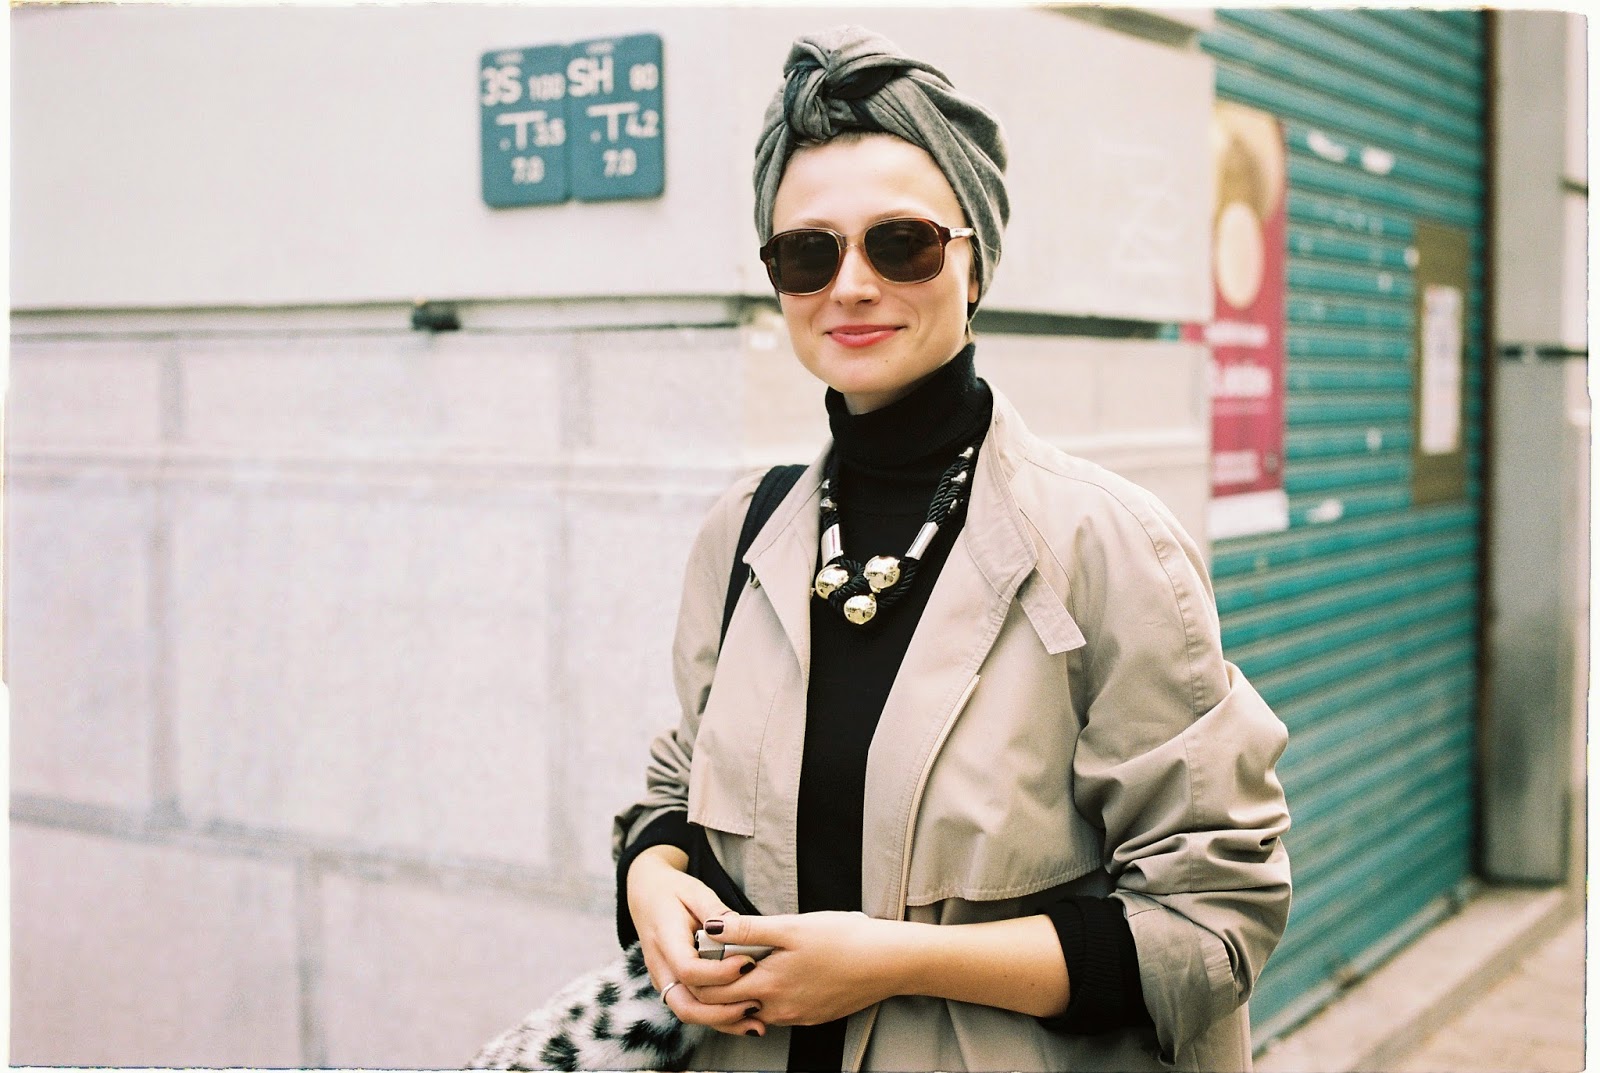 tonbogirl: For the love of turban, at Fashion LIVE!